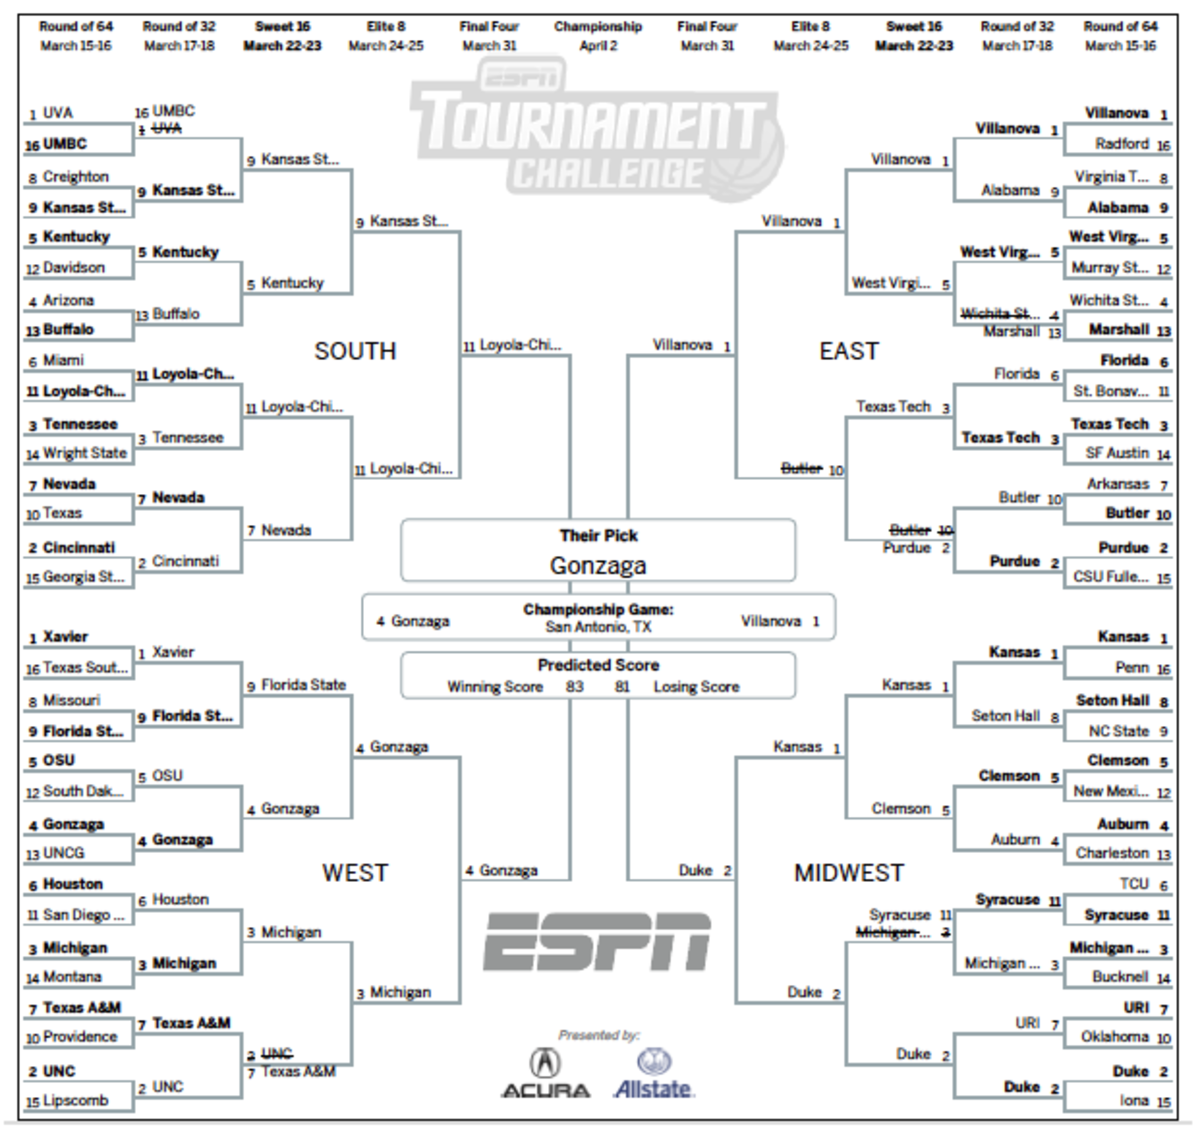 The best bracket in the country through one round.